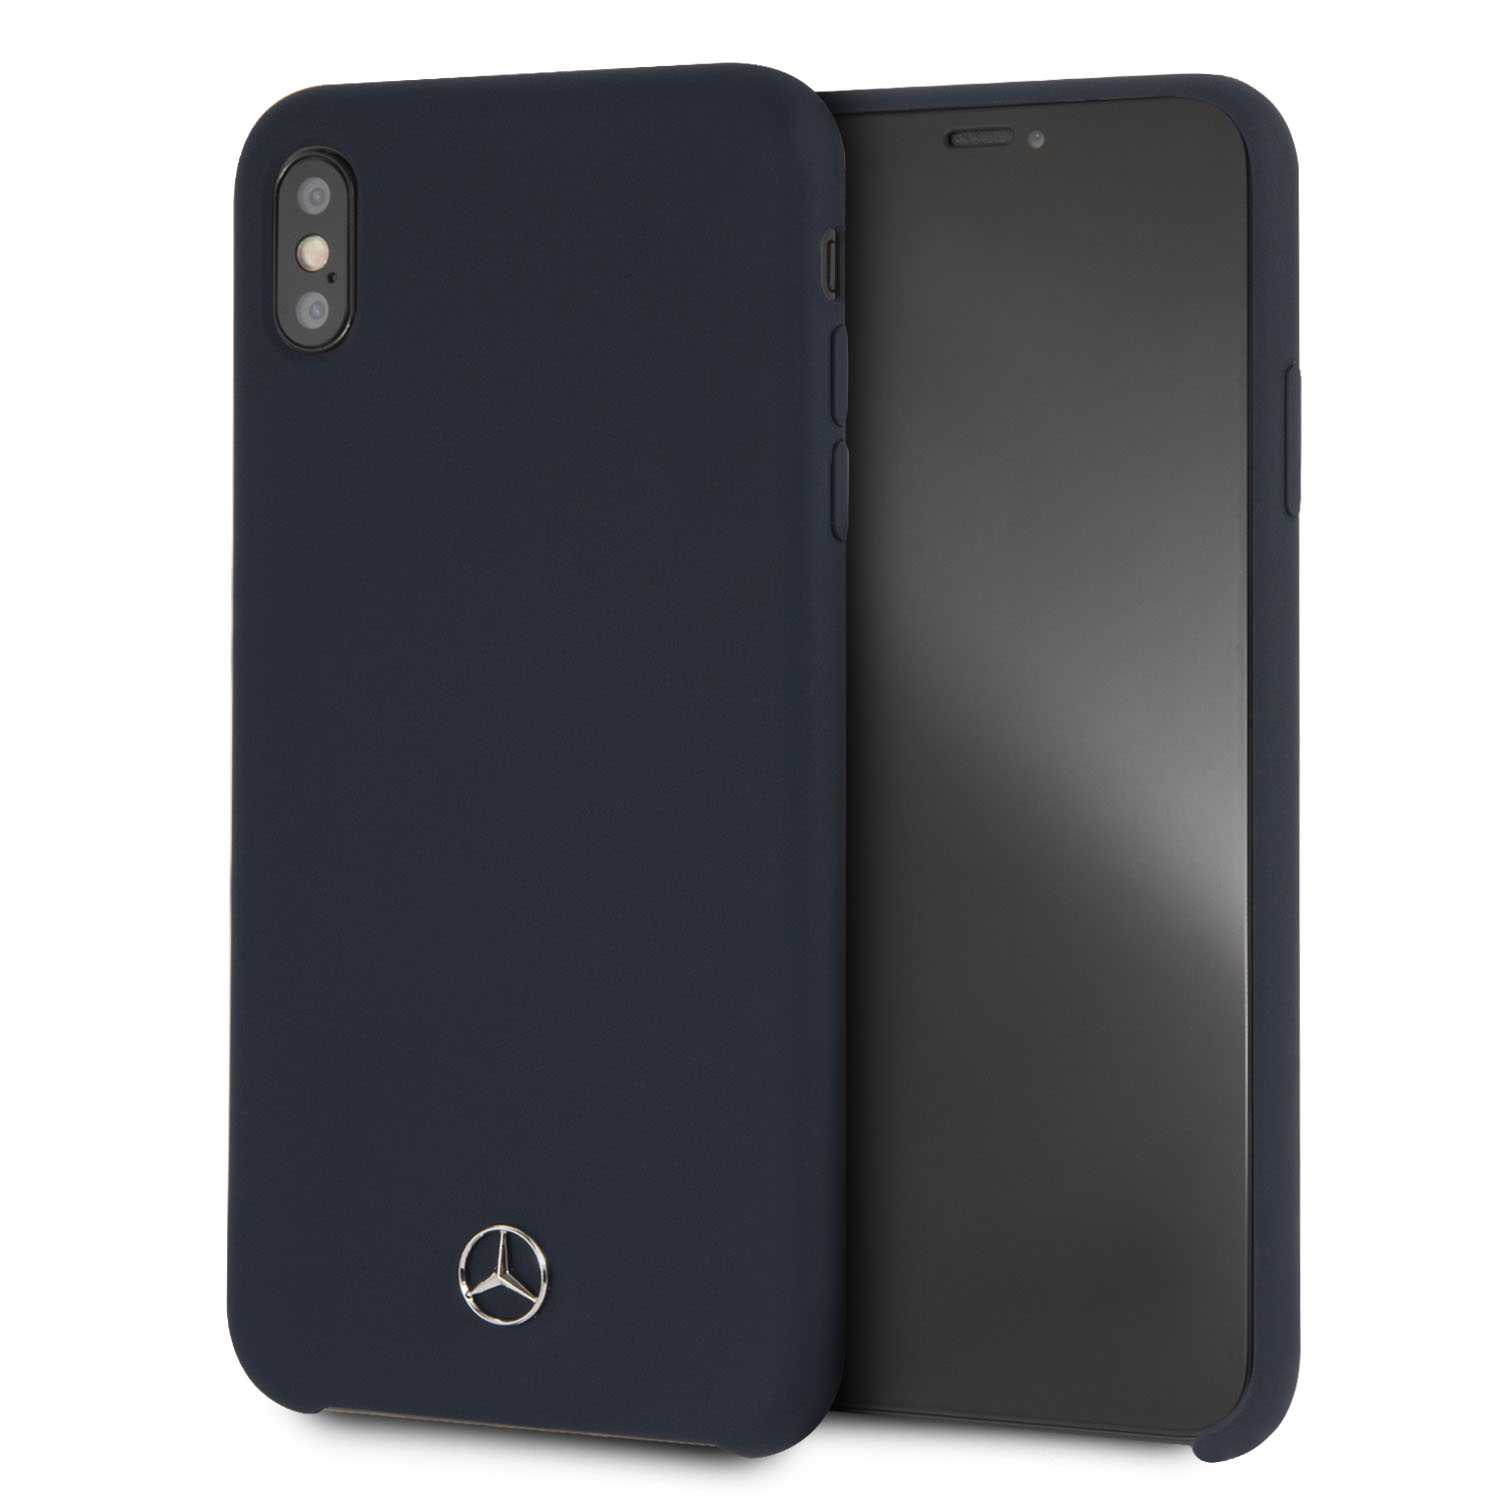 Mercedes-Benz Silicon Case Navy for iPhone XS Max